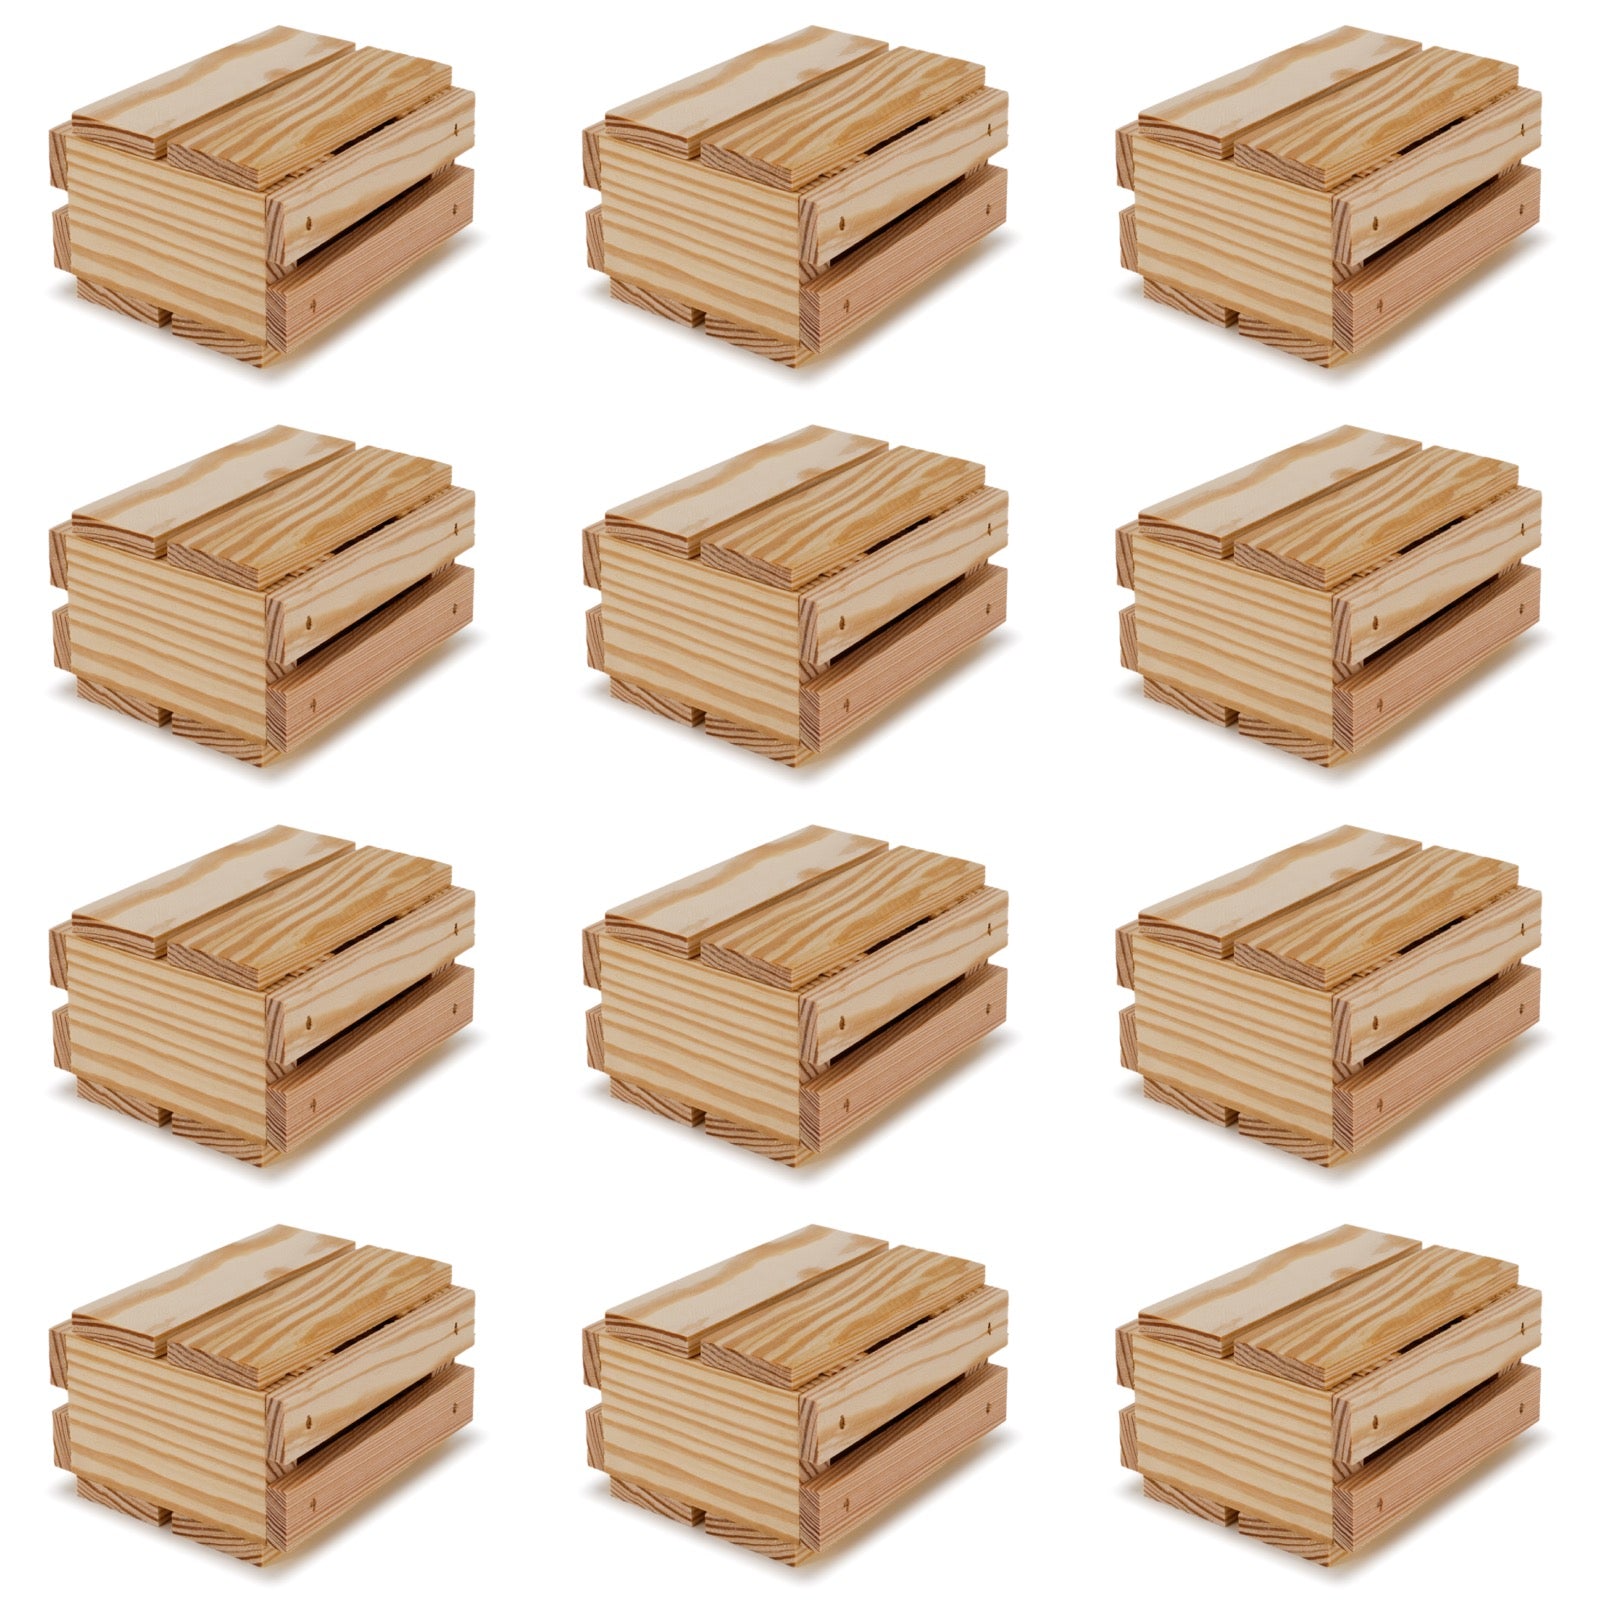 12 Small wooden crates with lid 4x4x2.5